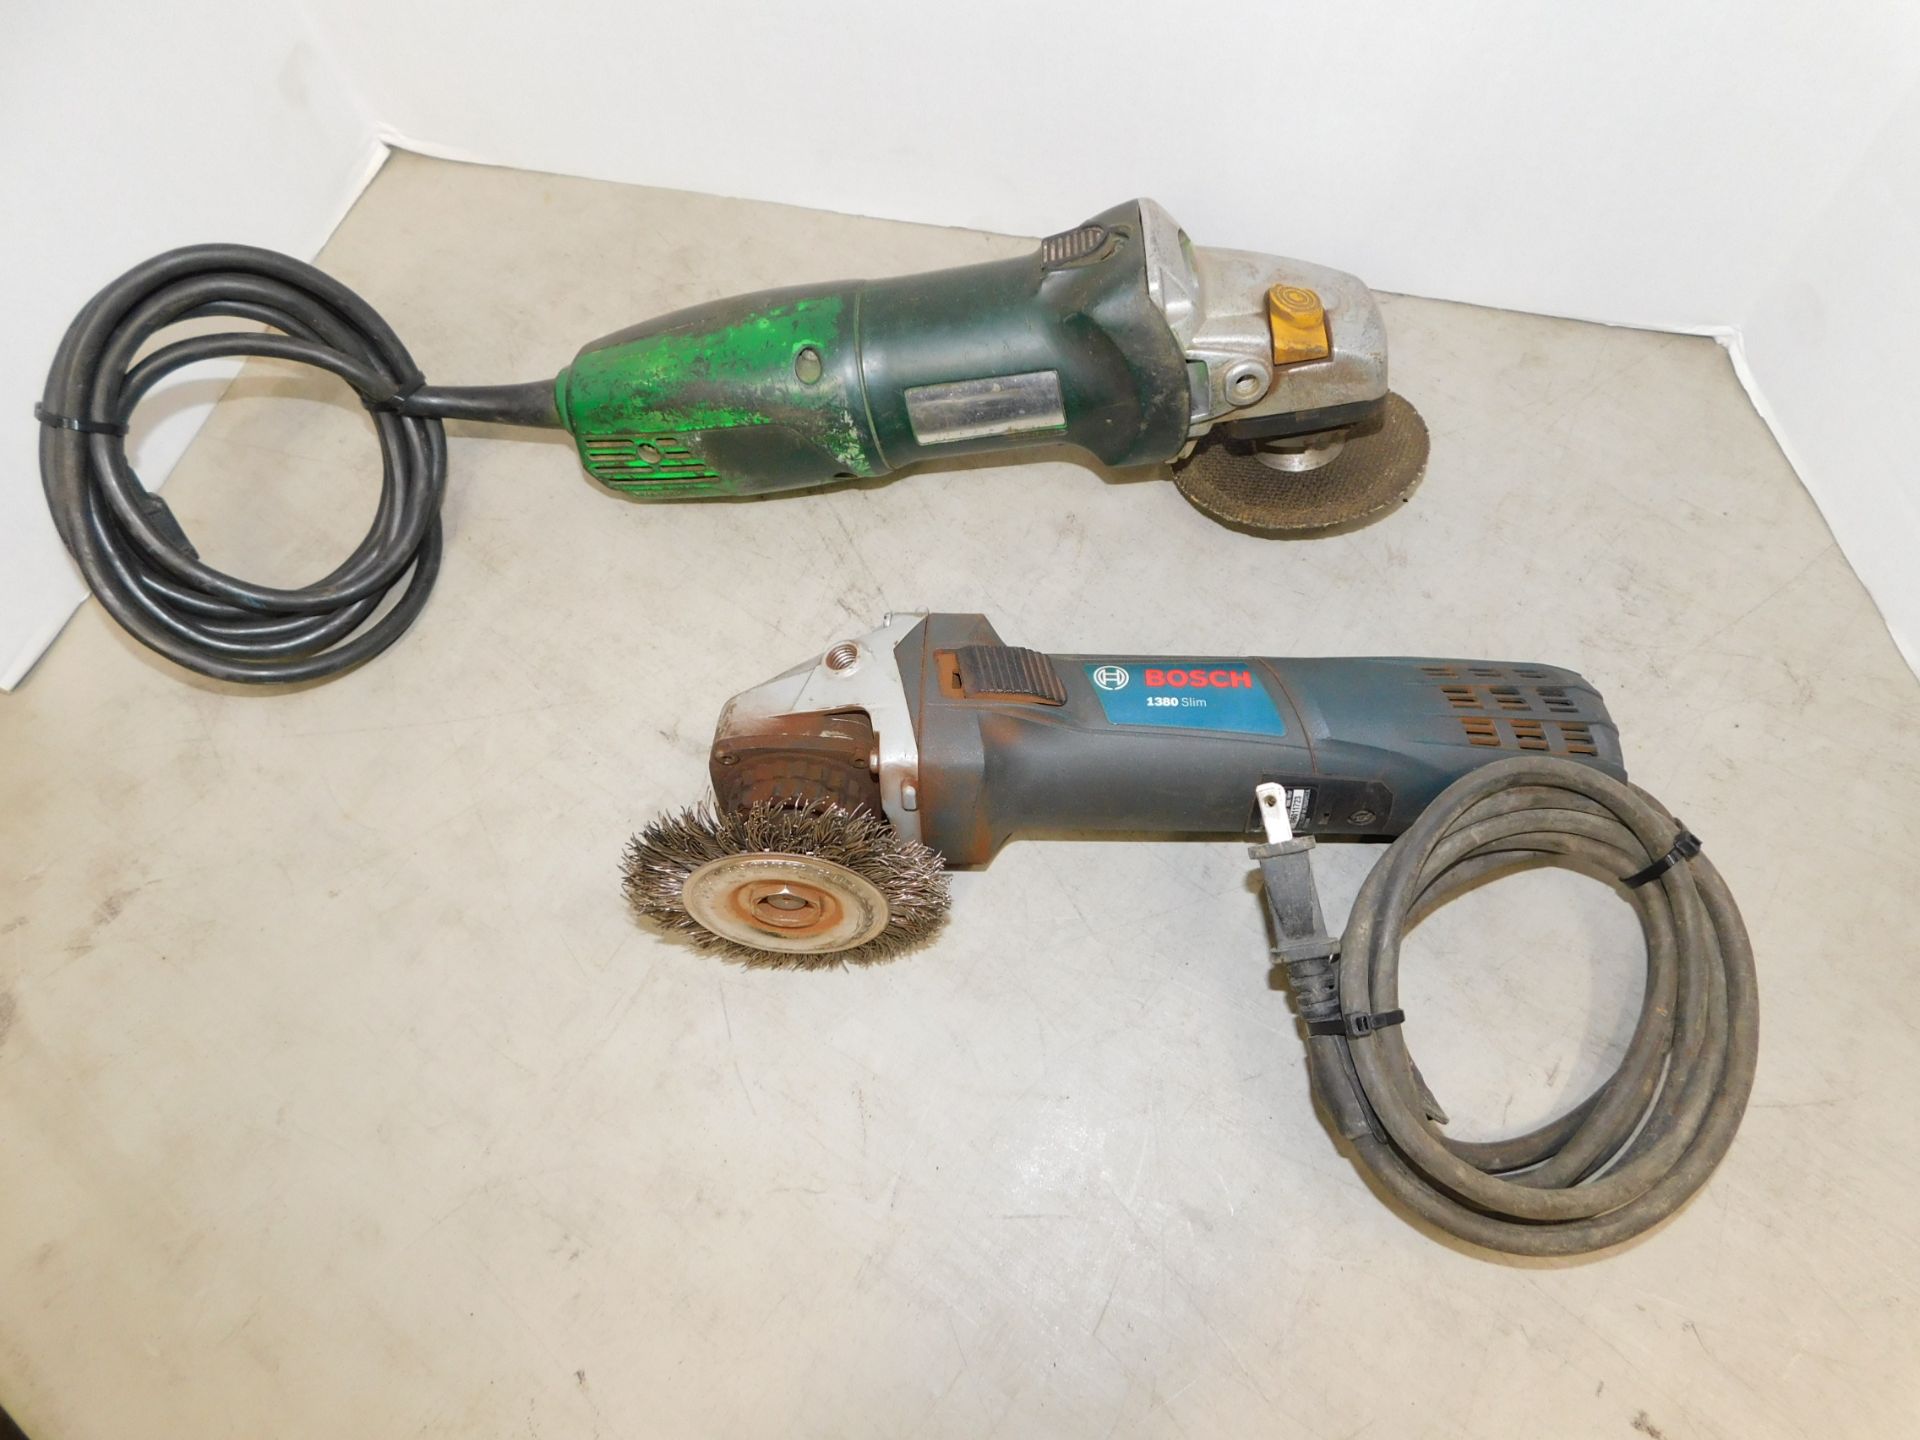 Bosch and Metabo 4 1/2" Grinders